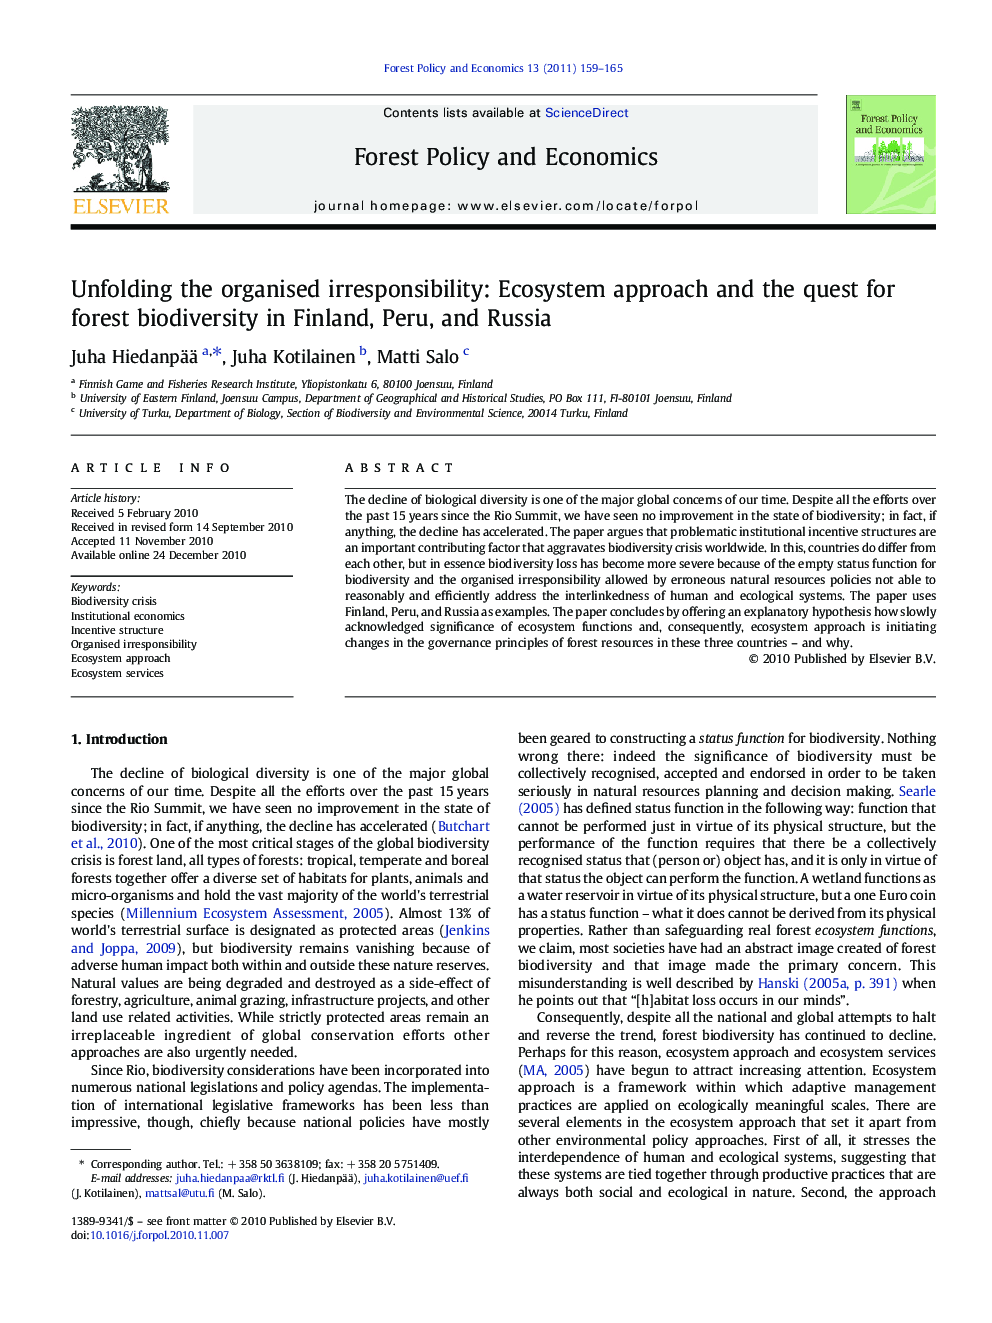 Unfolding the organised irresponsibility: Ecosystem approach and the quest for forest biodiversity in Finland, Peru, and Russia